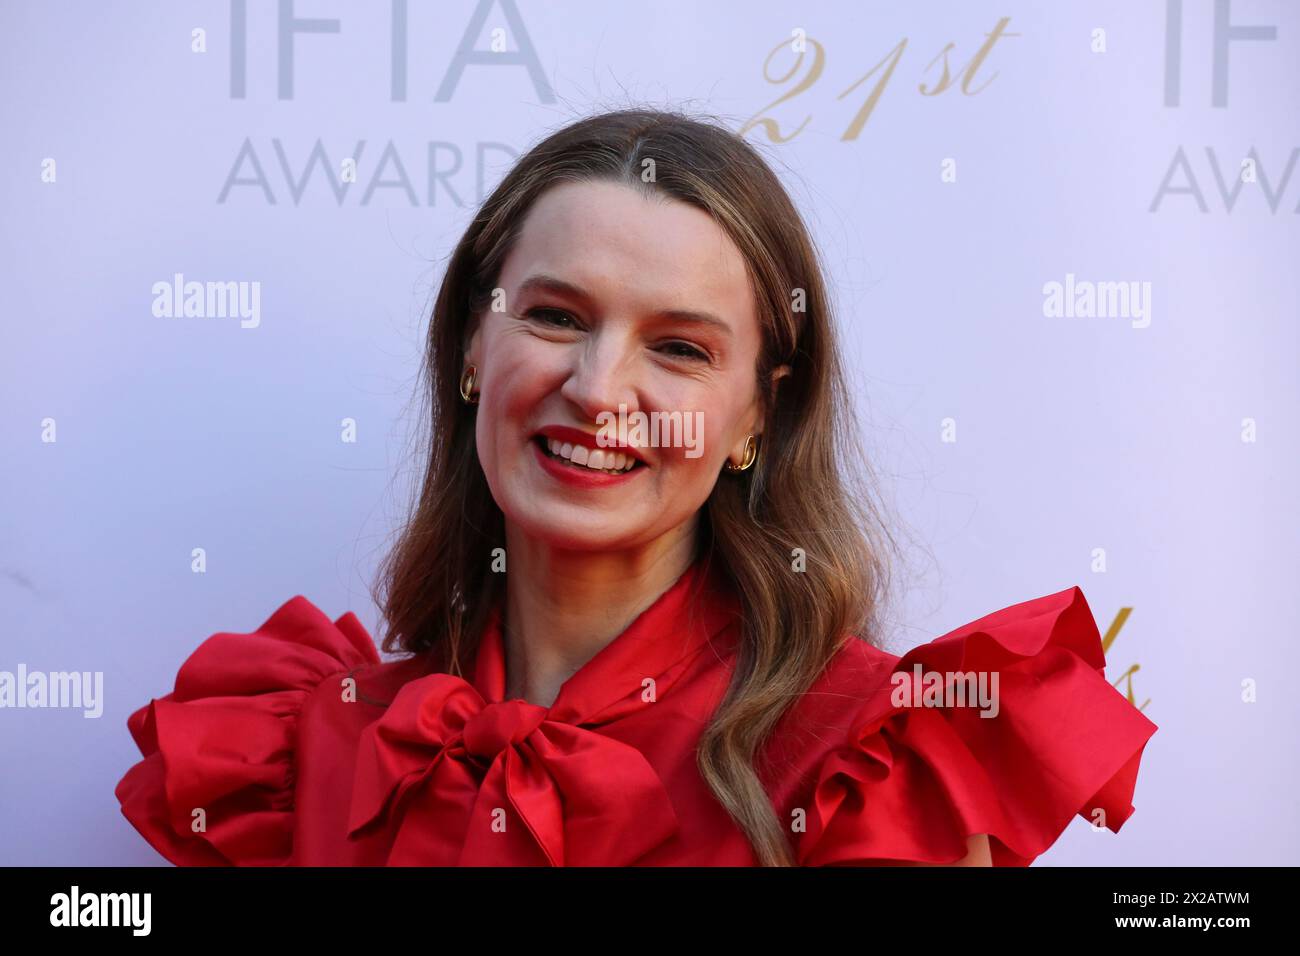 Dublin, Ireland. 20th April 2024.  Catherine Walker arriving on the red carpet at the Irish Film and Television Awards (IFTA), Dublin Royal Convention Centre. Credit: Doreen Kennedy/Alamy Live News. Stock Photo